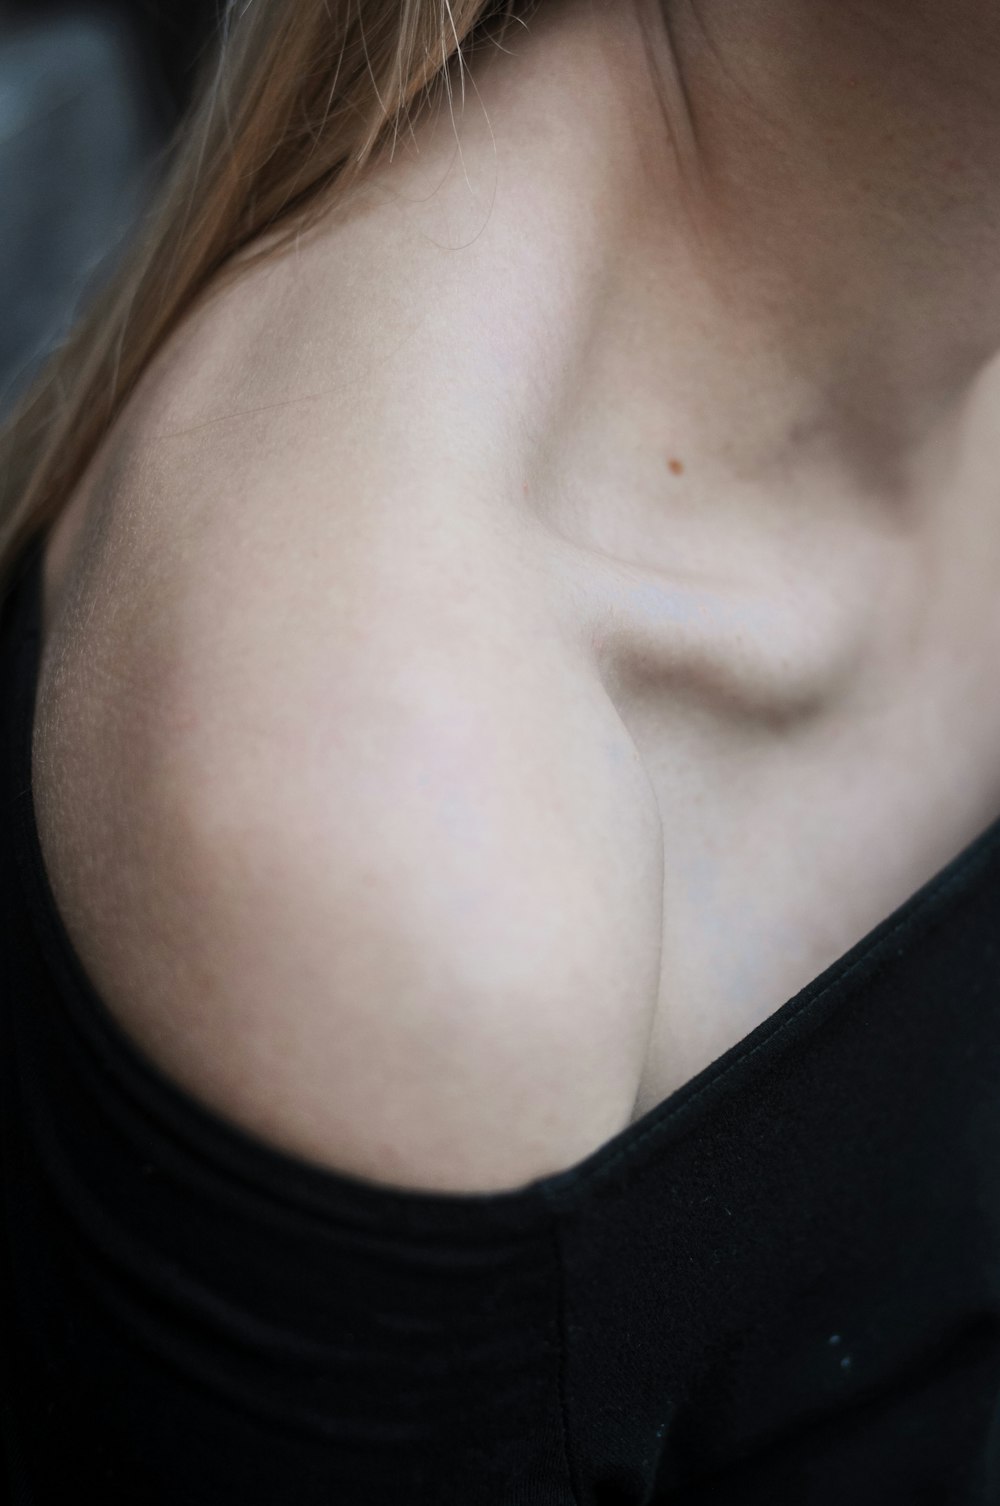 a close up of a woman's breast with a cell phone in her hand